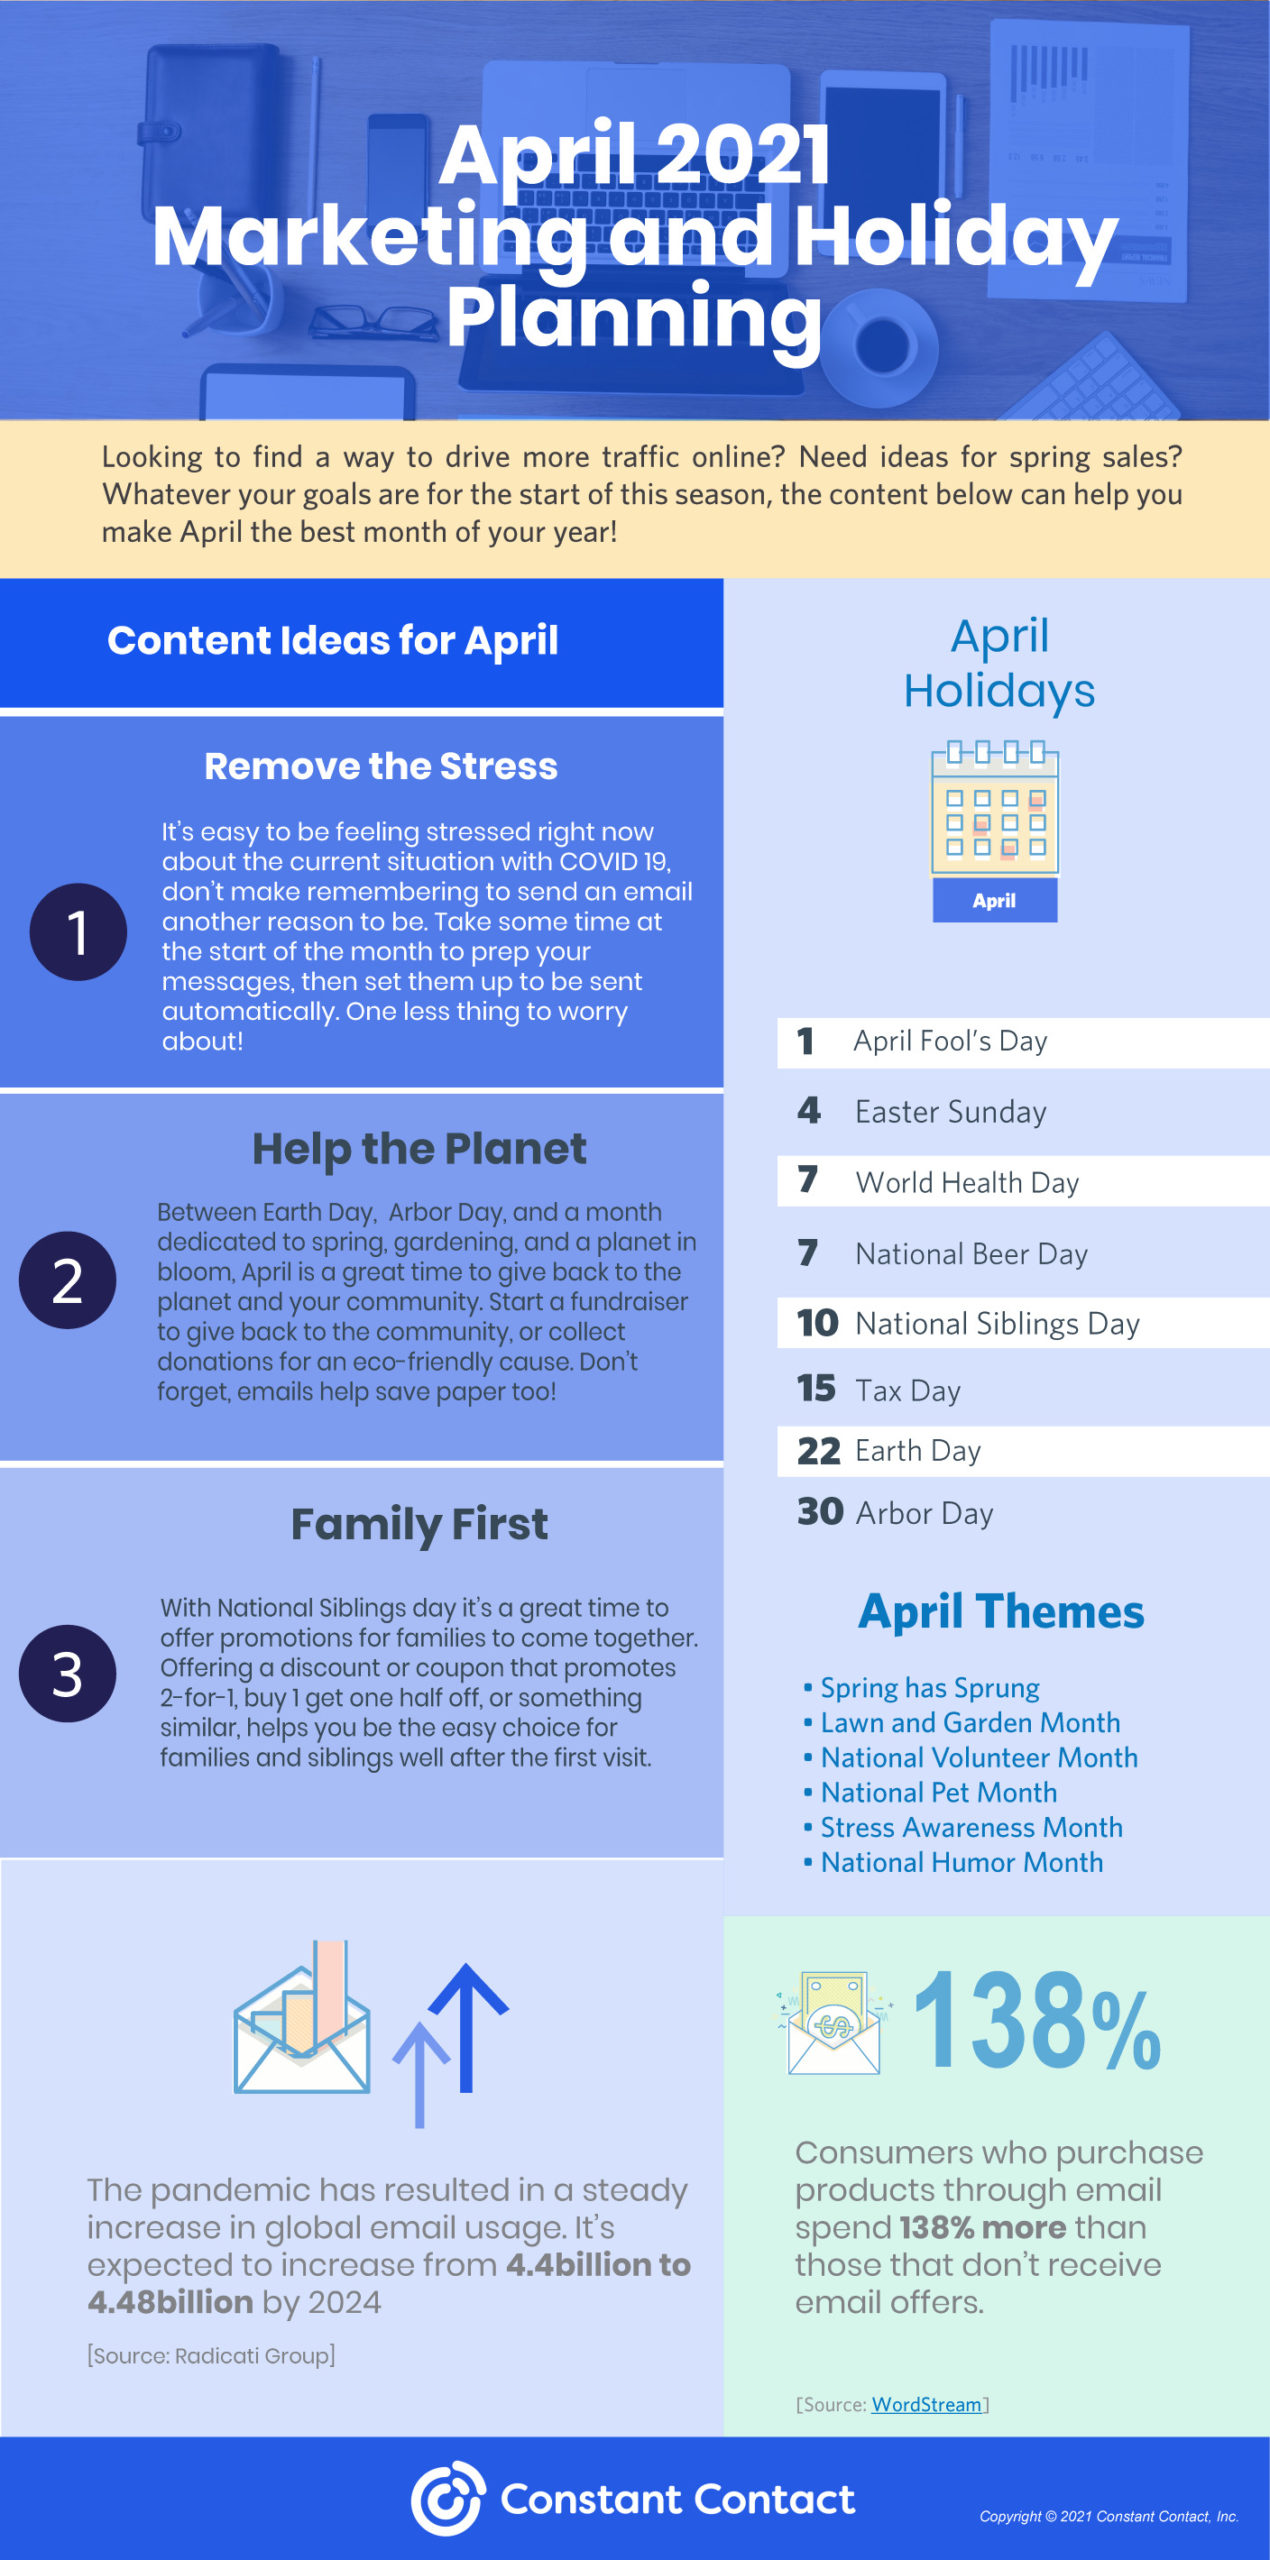 April Holidays for Marketing Planning — 2021 Business 2 Community